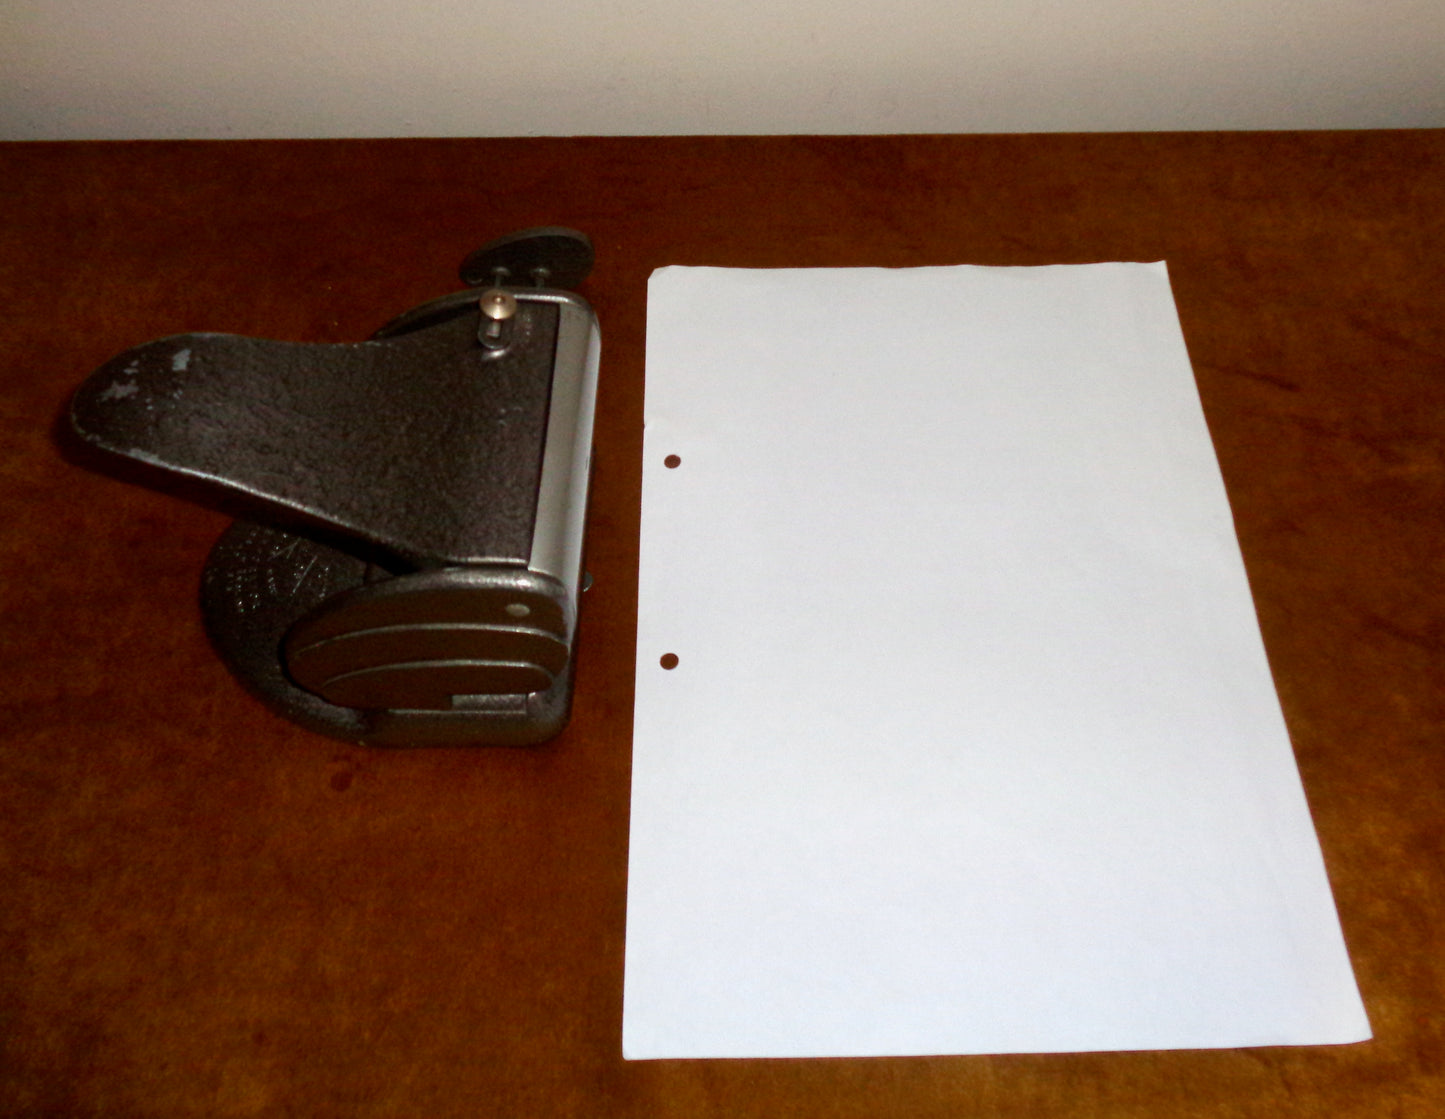 1940s Velos Perforator No. 4316 Paper Hole Punch